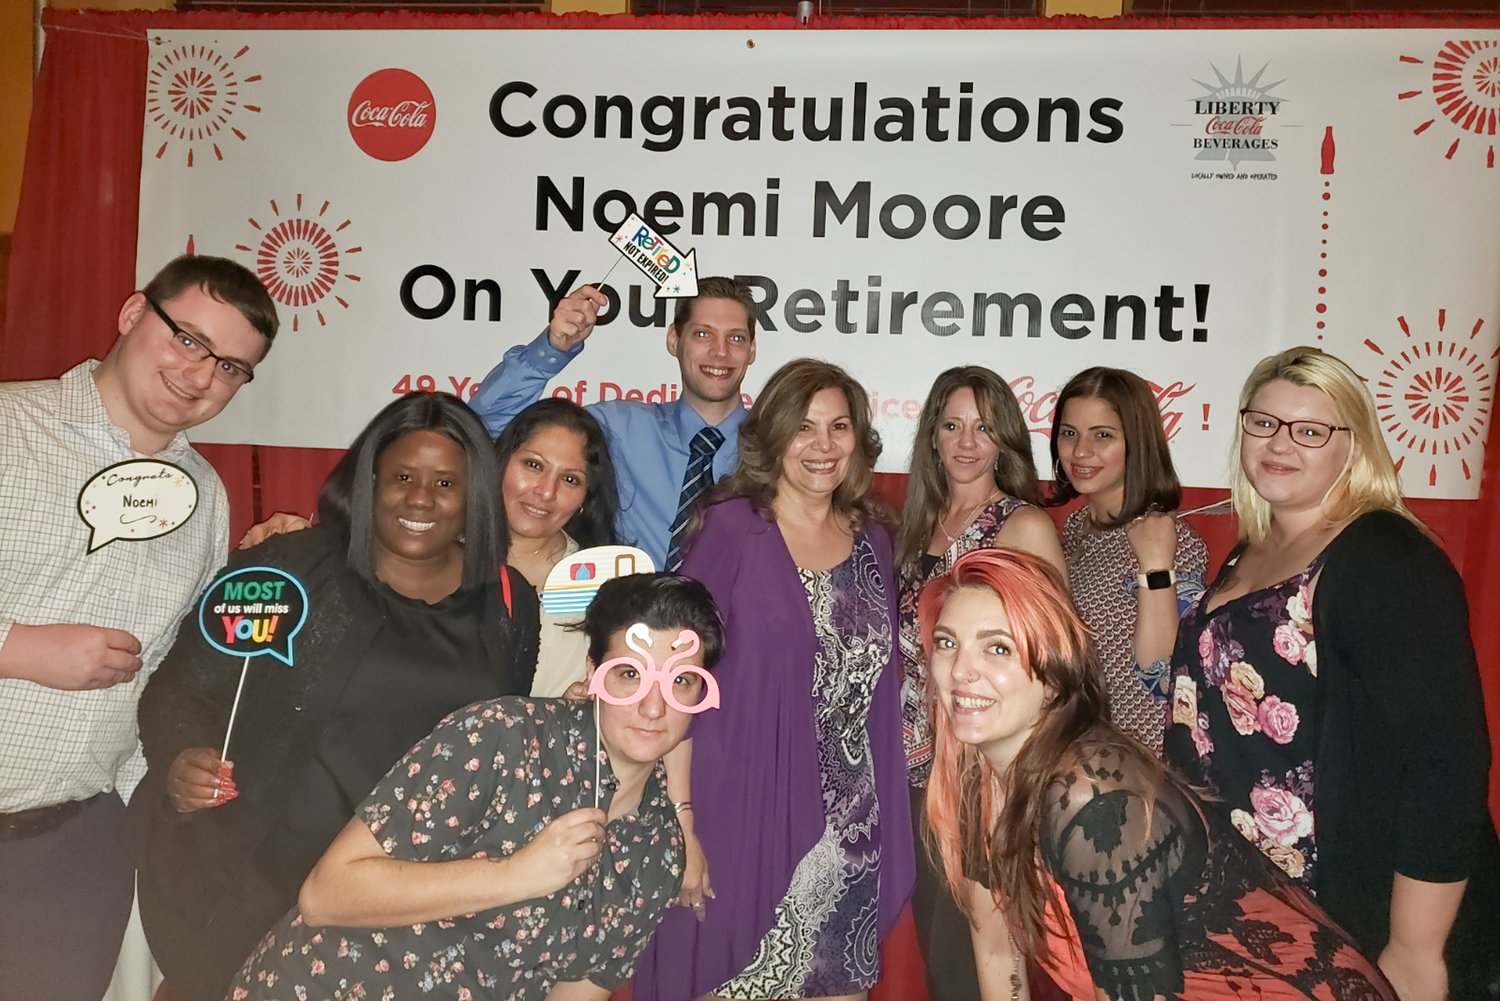 Noemi Moore, center, with her co-workers and team celebrating her retirement after nearly 50 years at Coca-Cola.